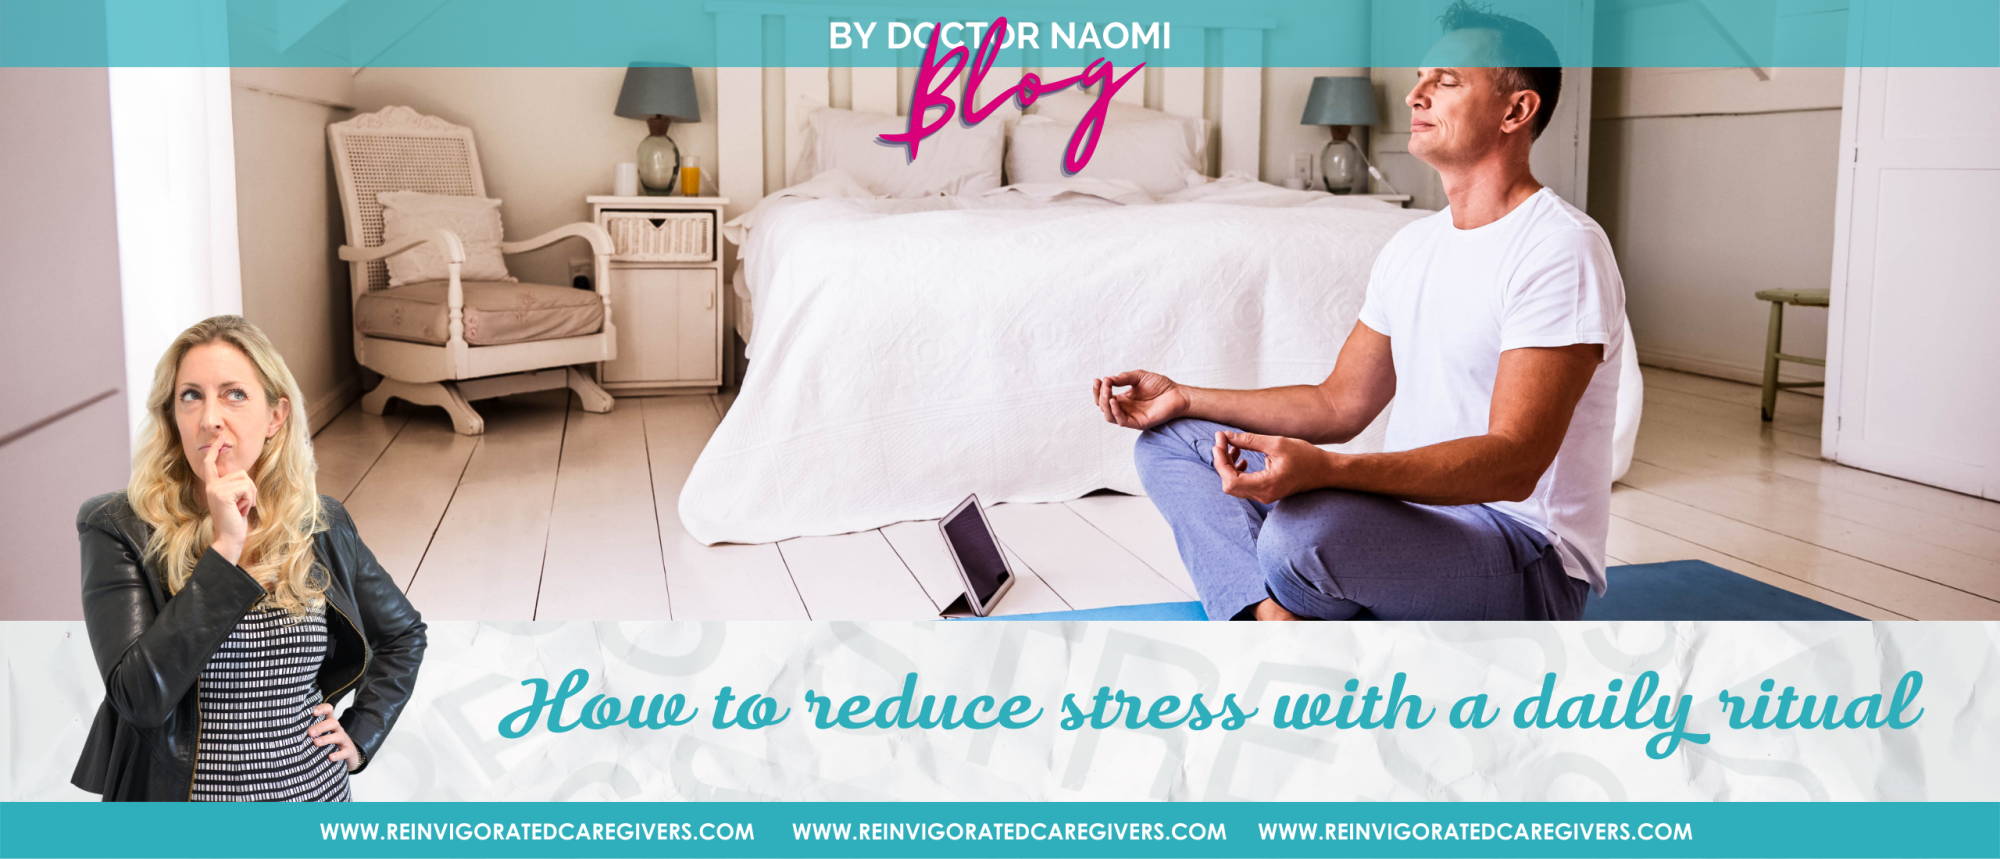 Blog How to reduce stress with a daily ritual